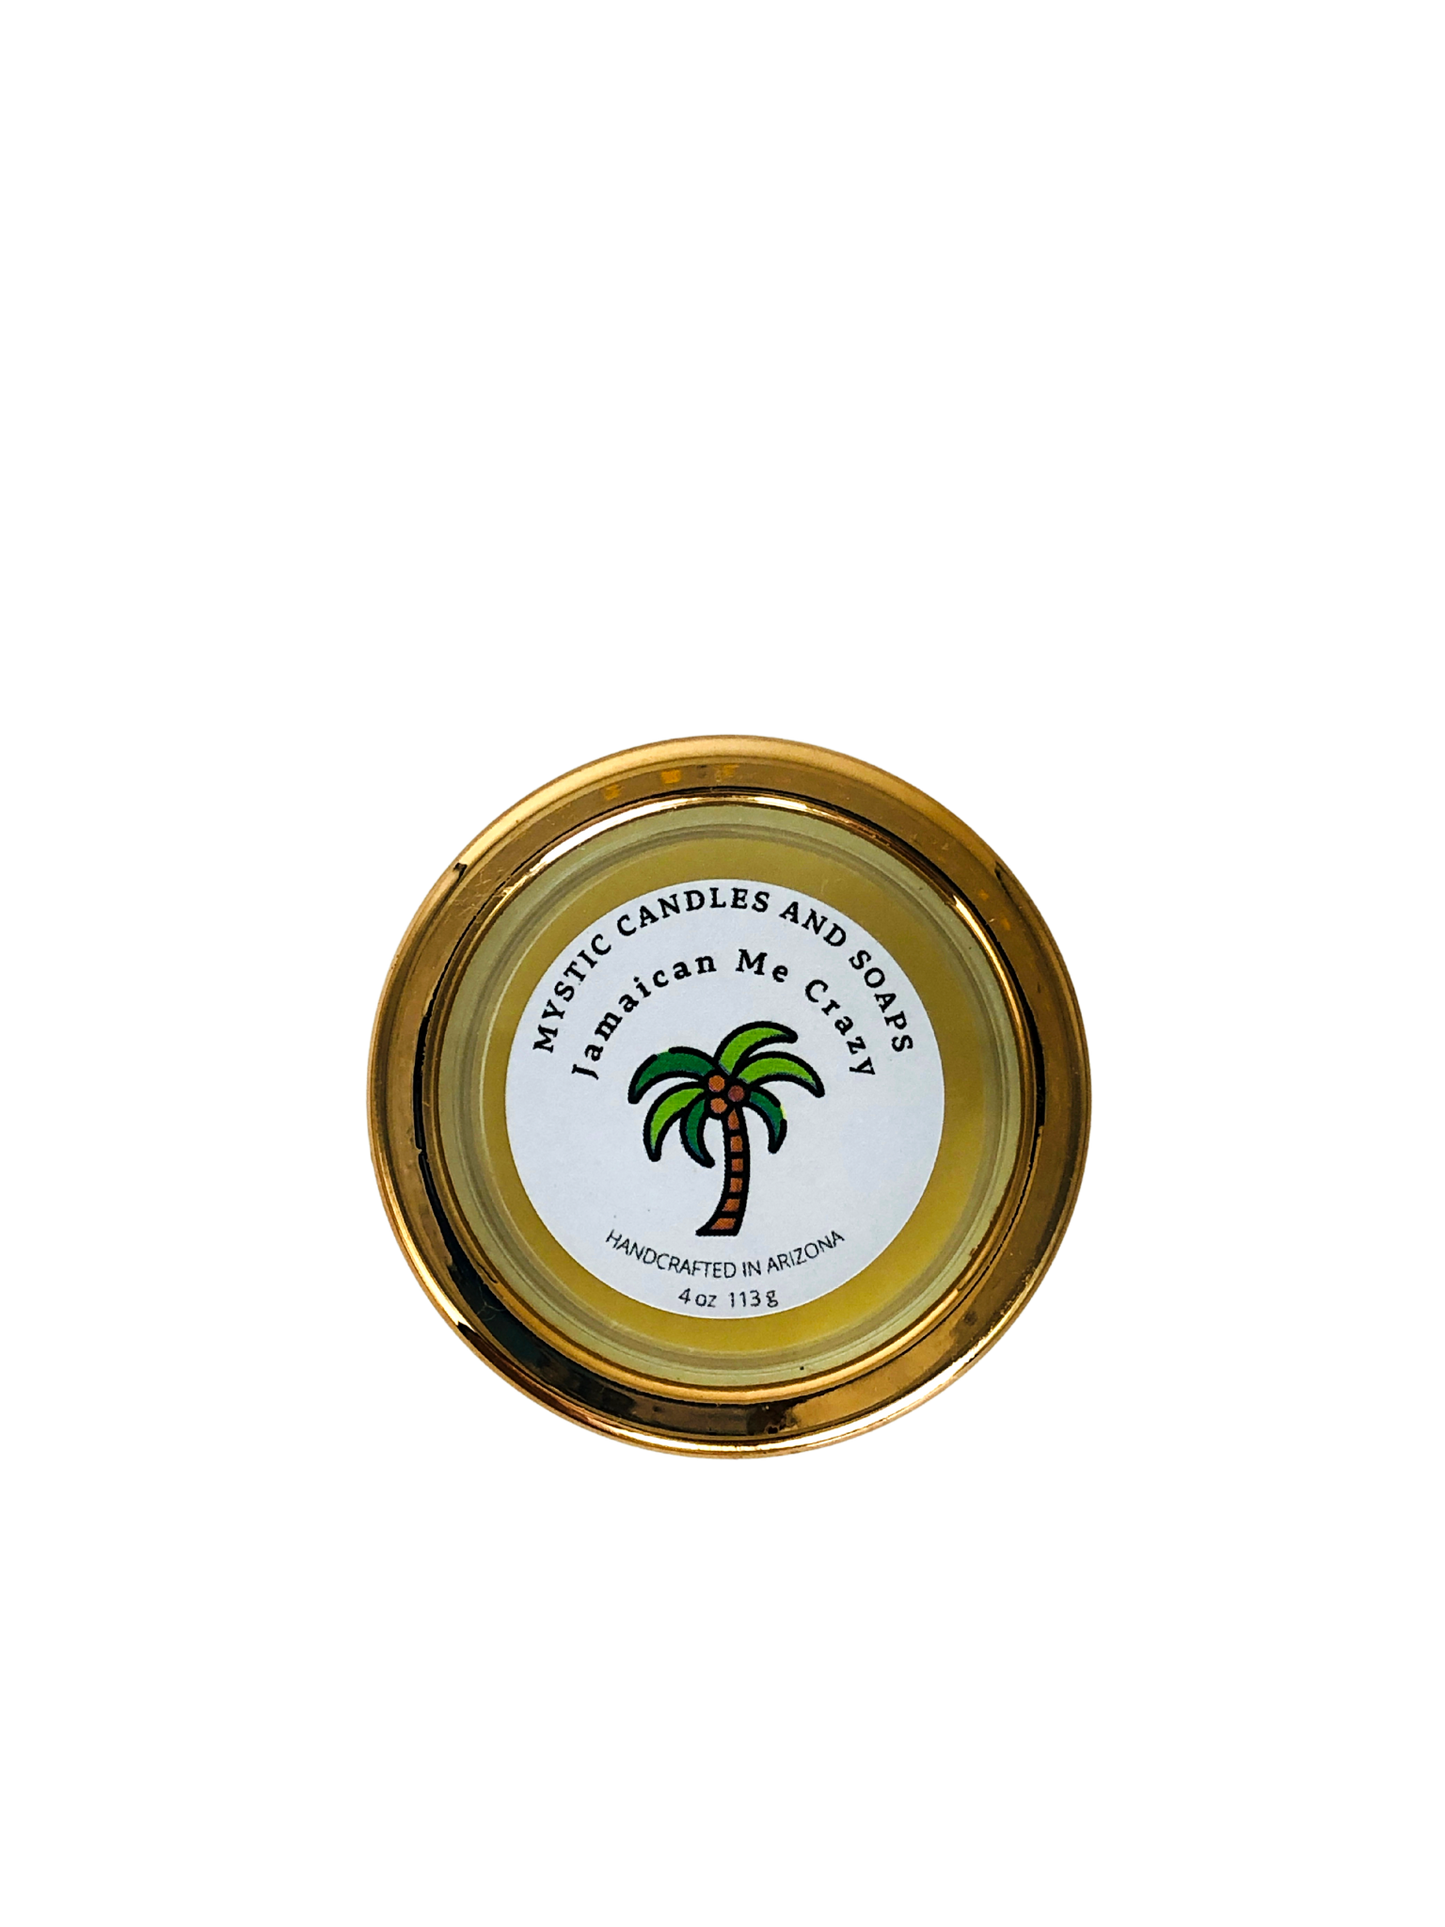 Jamaican Me Crazy Flameless Candle - Mystic Candles and Soaps LLC